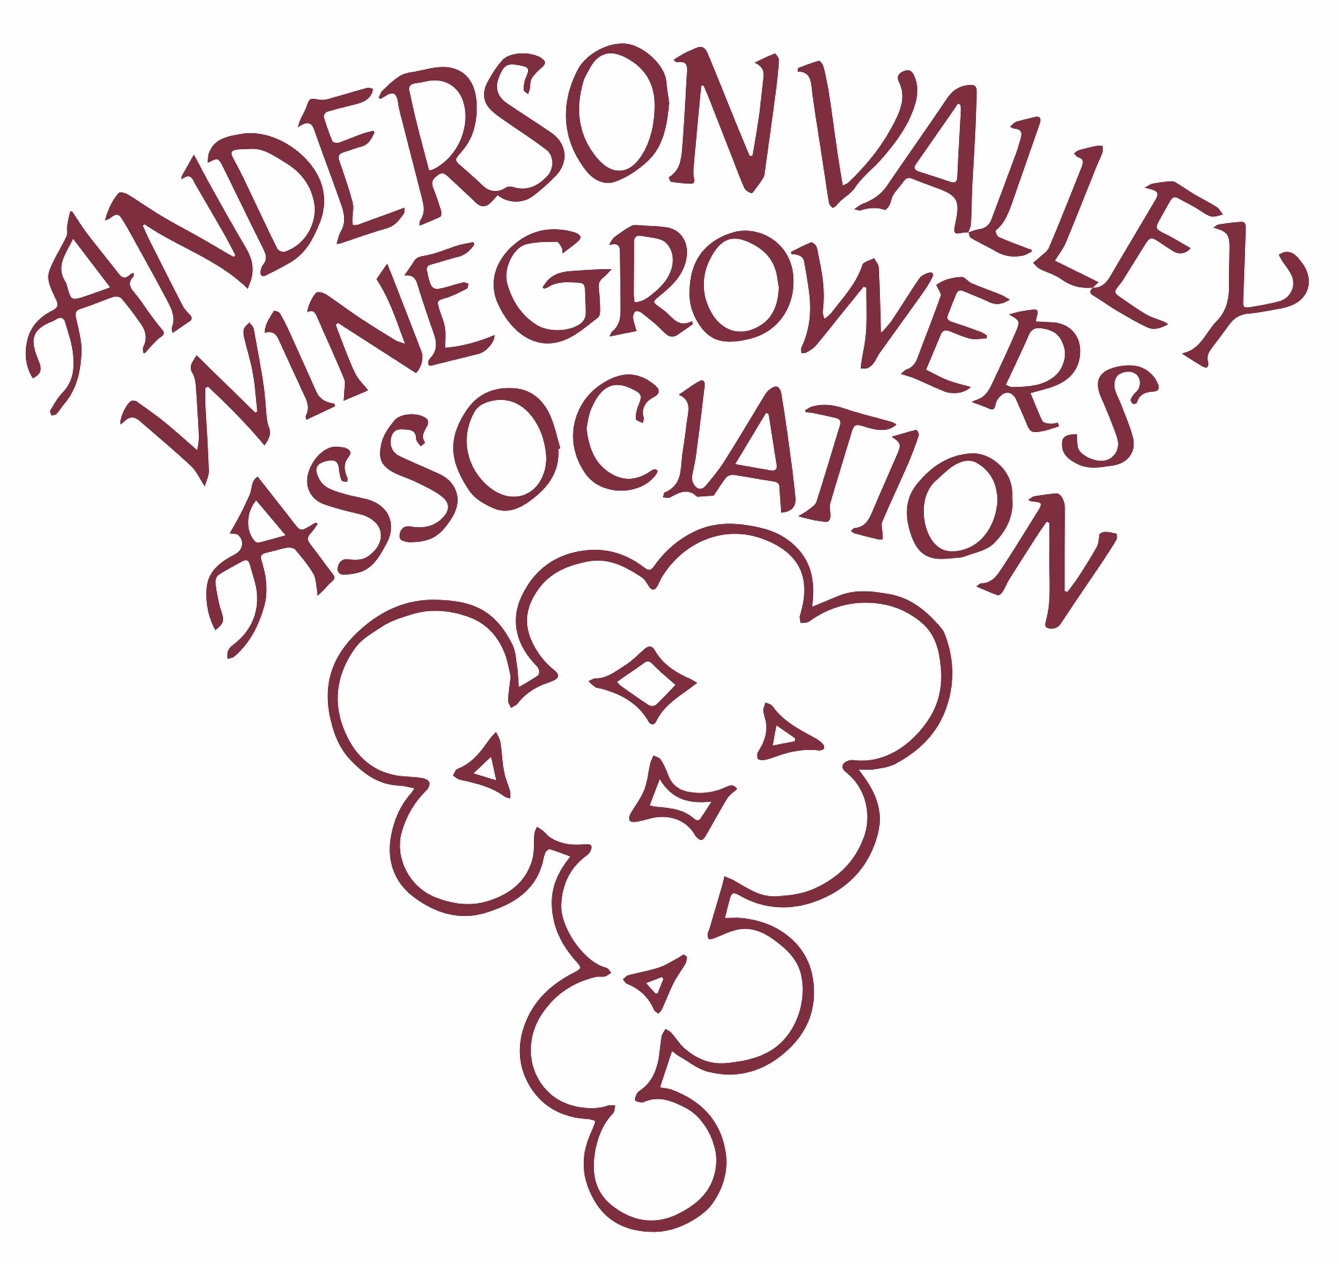 Anderson Valley Winegrowers